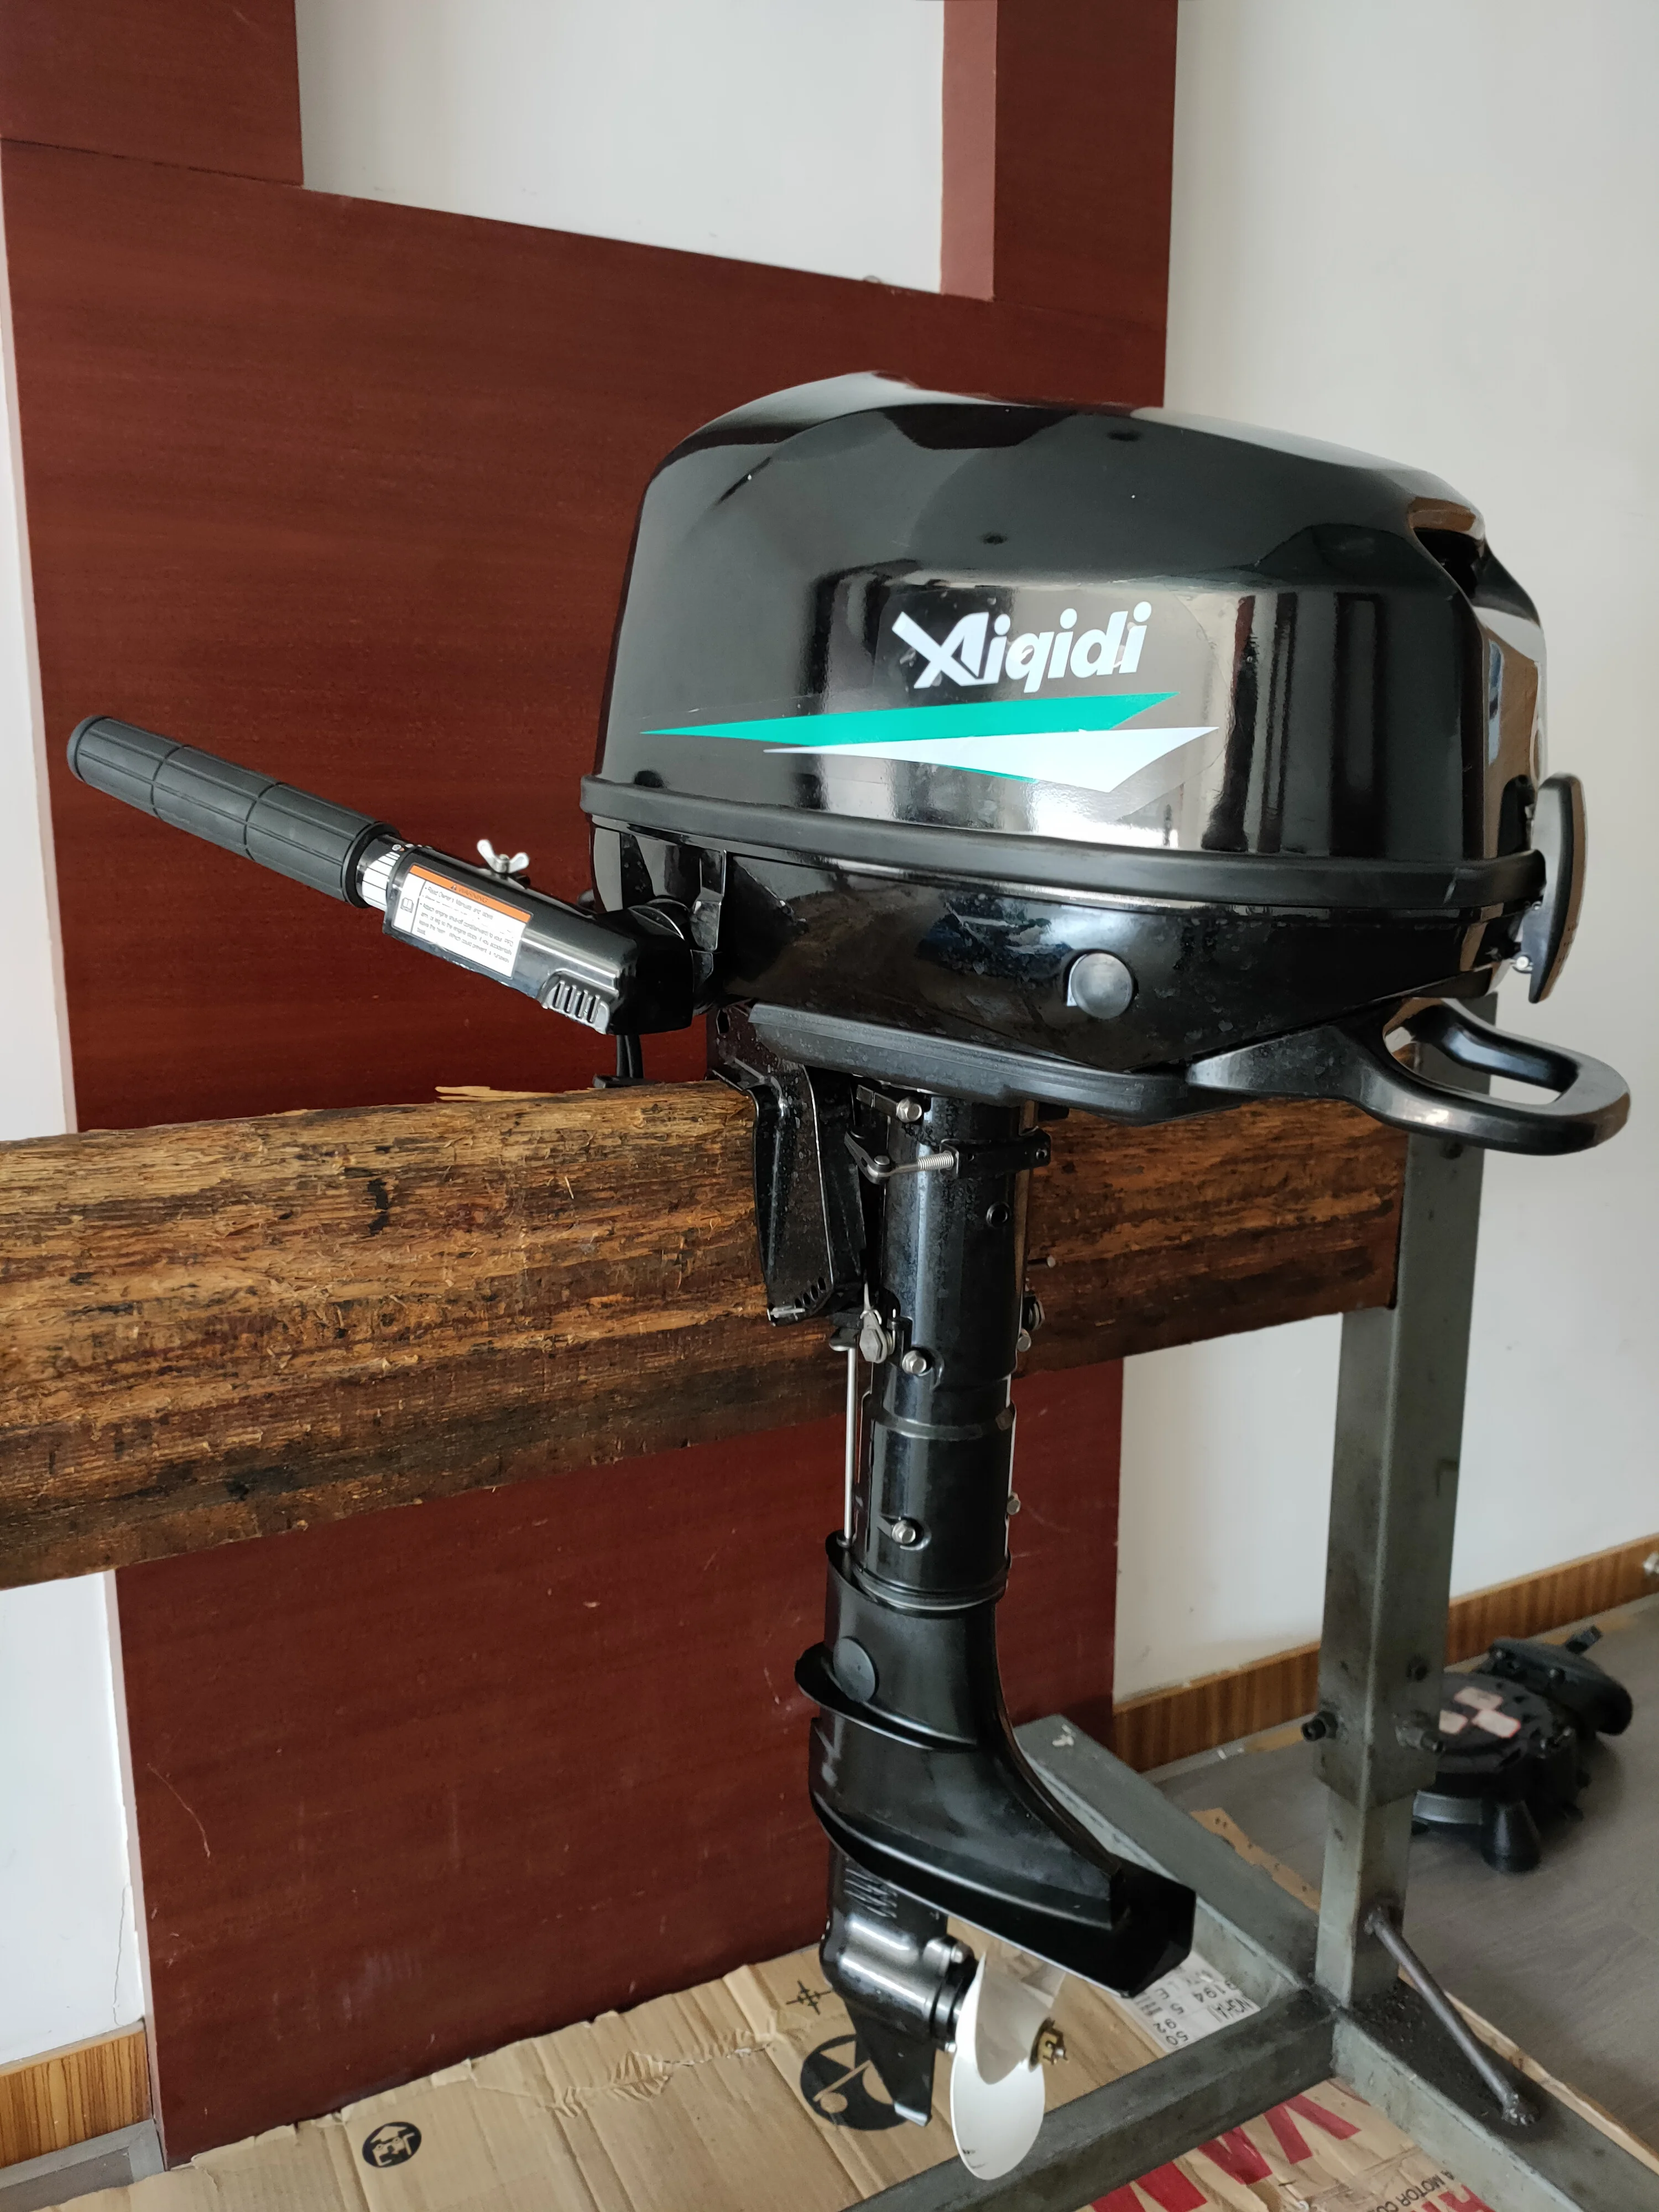 electric engine E7 electric outboard motor